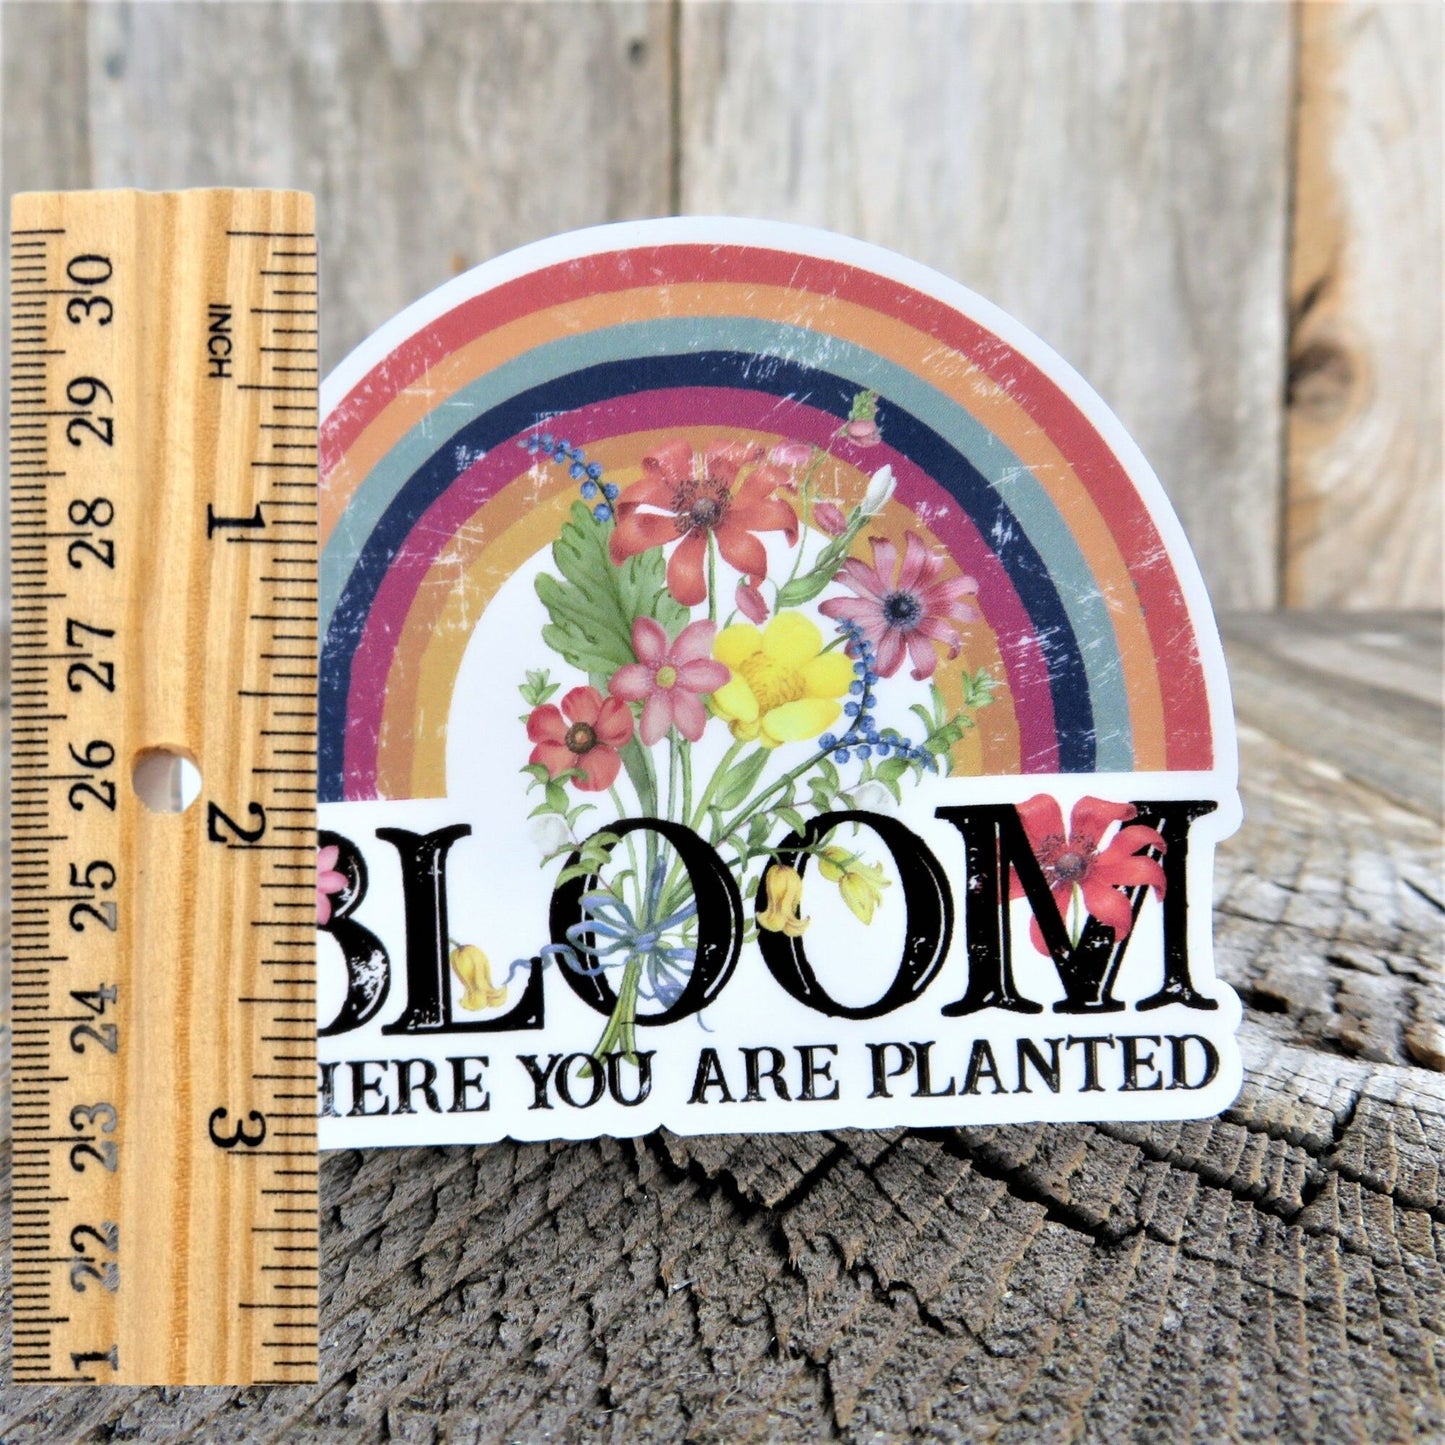 Rainbow Flowers Bloom Where You Are Planted Sticker BoHo Distressed Rustic Decal Full Color Waterproof Gardener Bugs Car Water Bottle Laptop